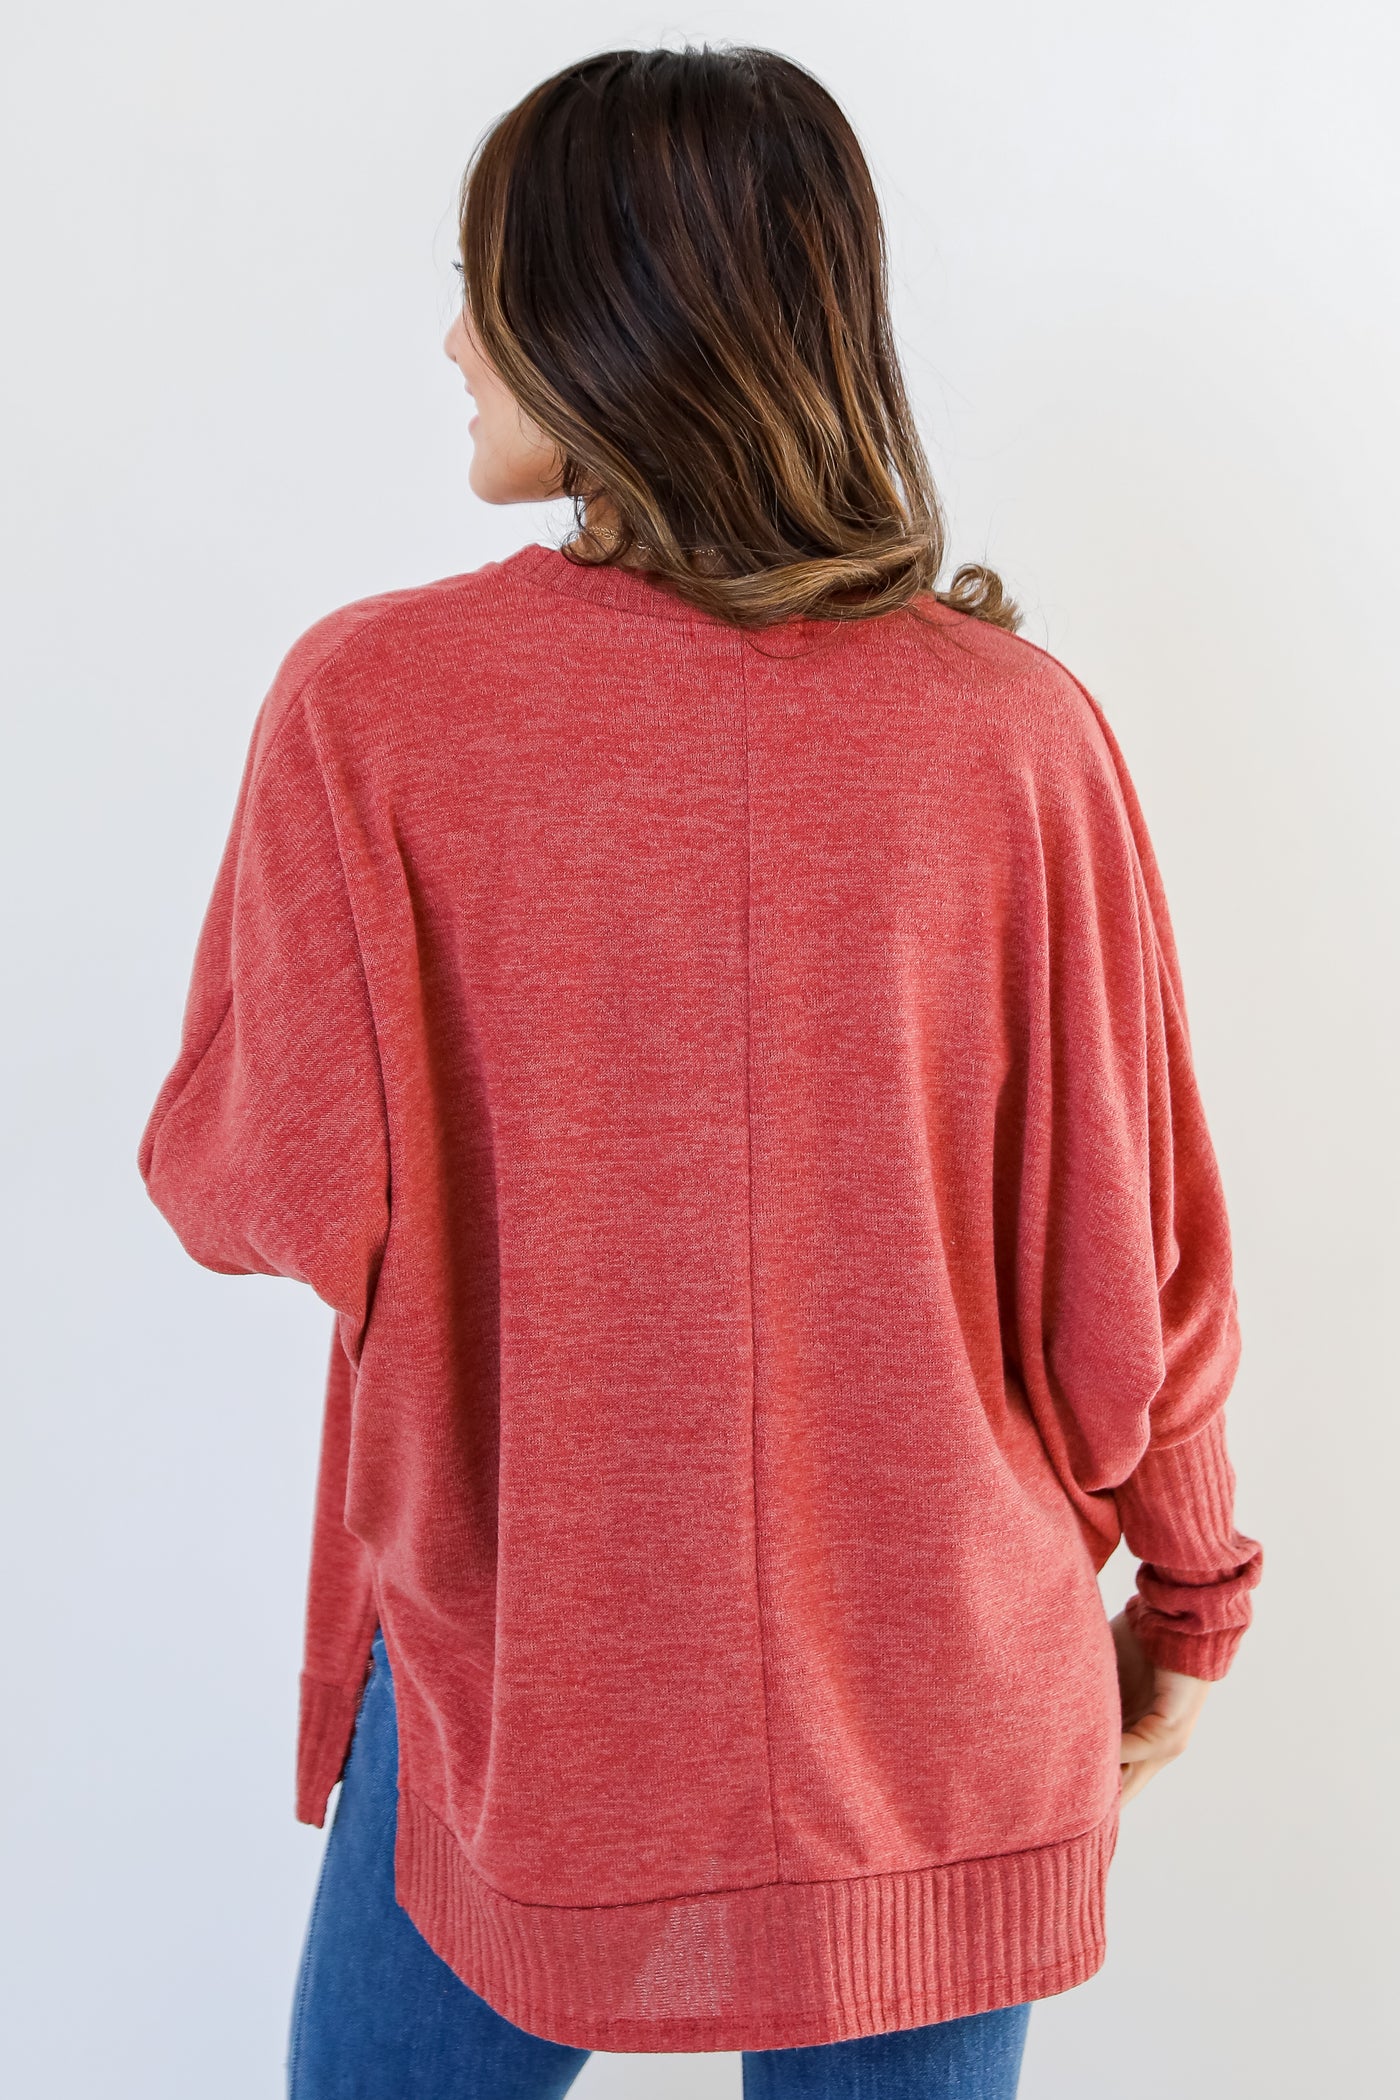 red Knit Top back view